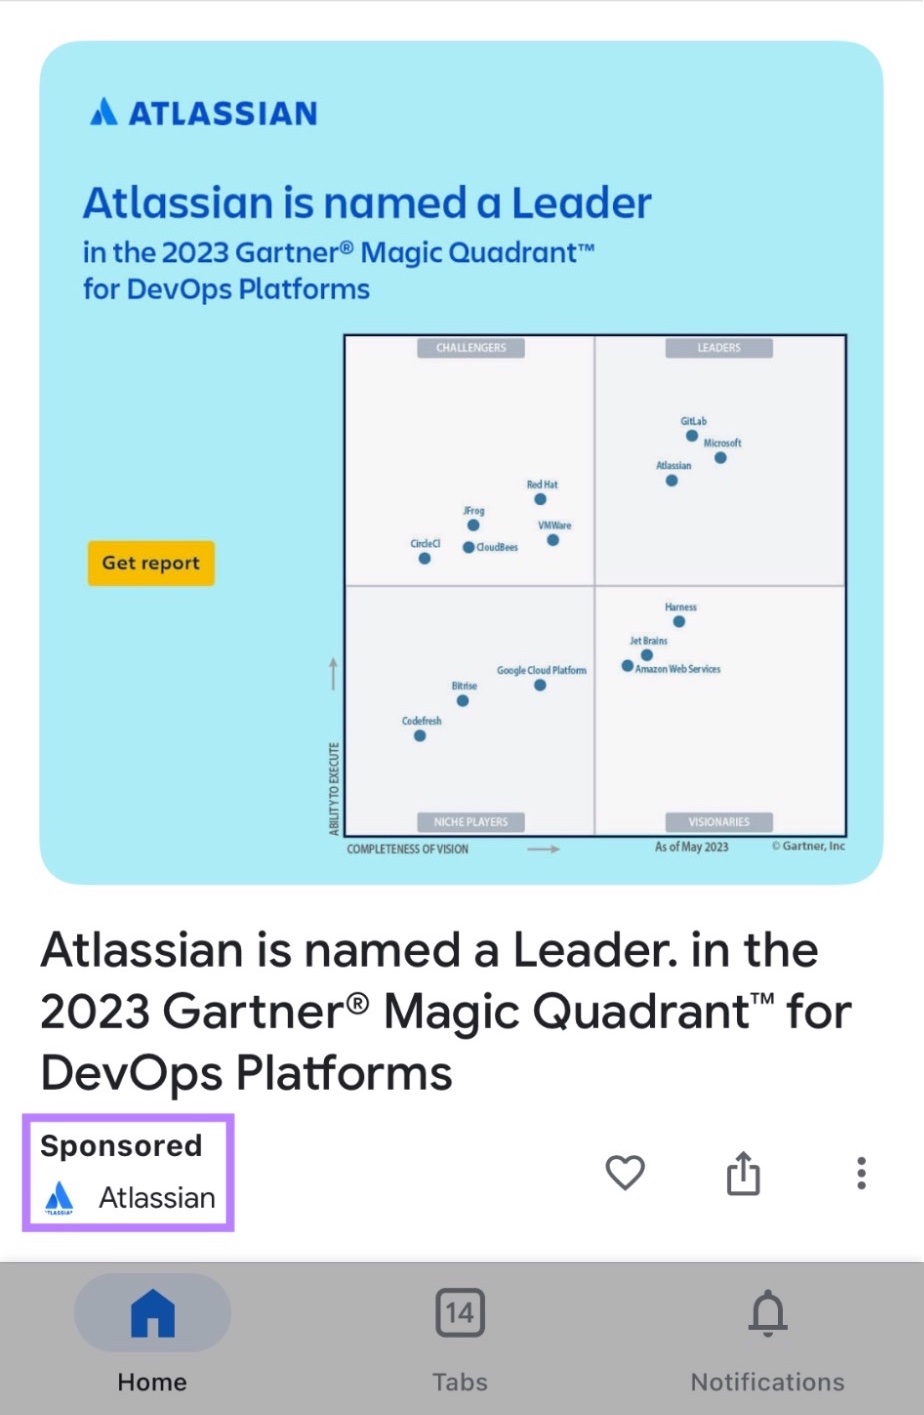 Atlassian's promotion of industry recognition on the Google Discover feed